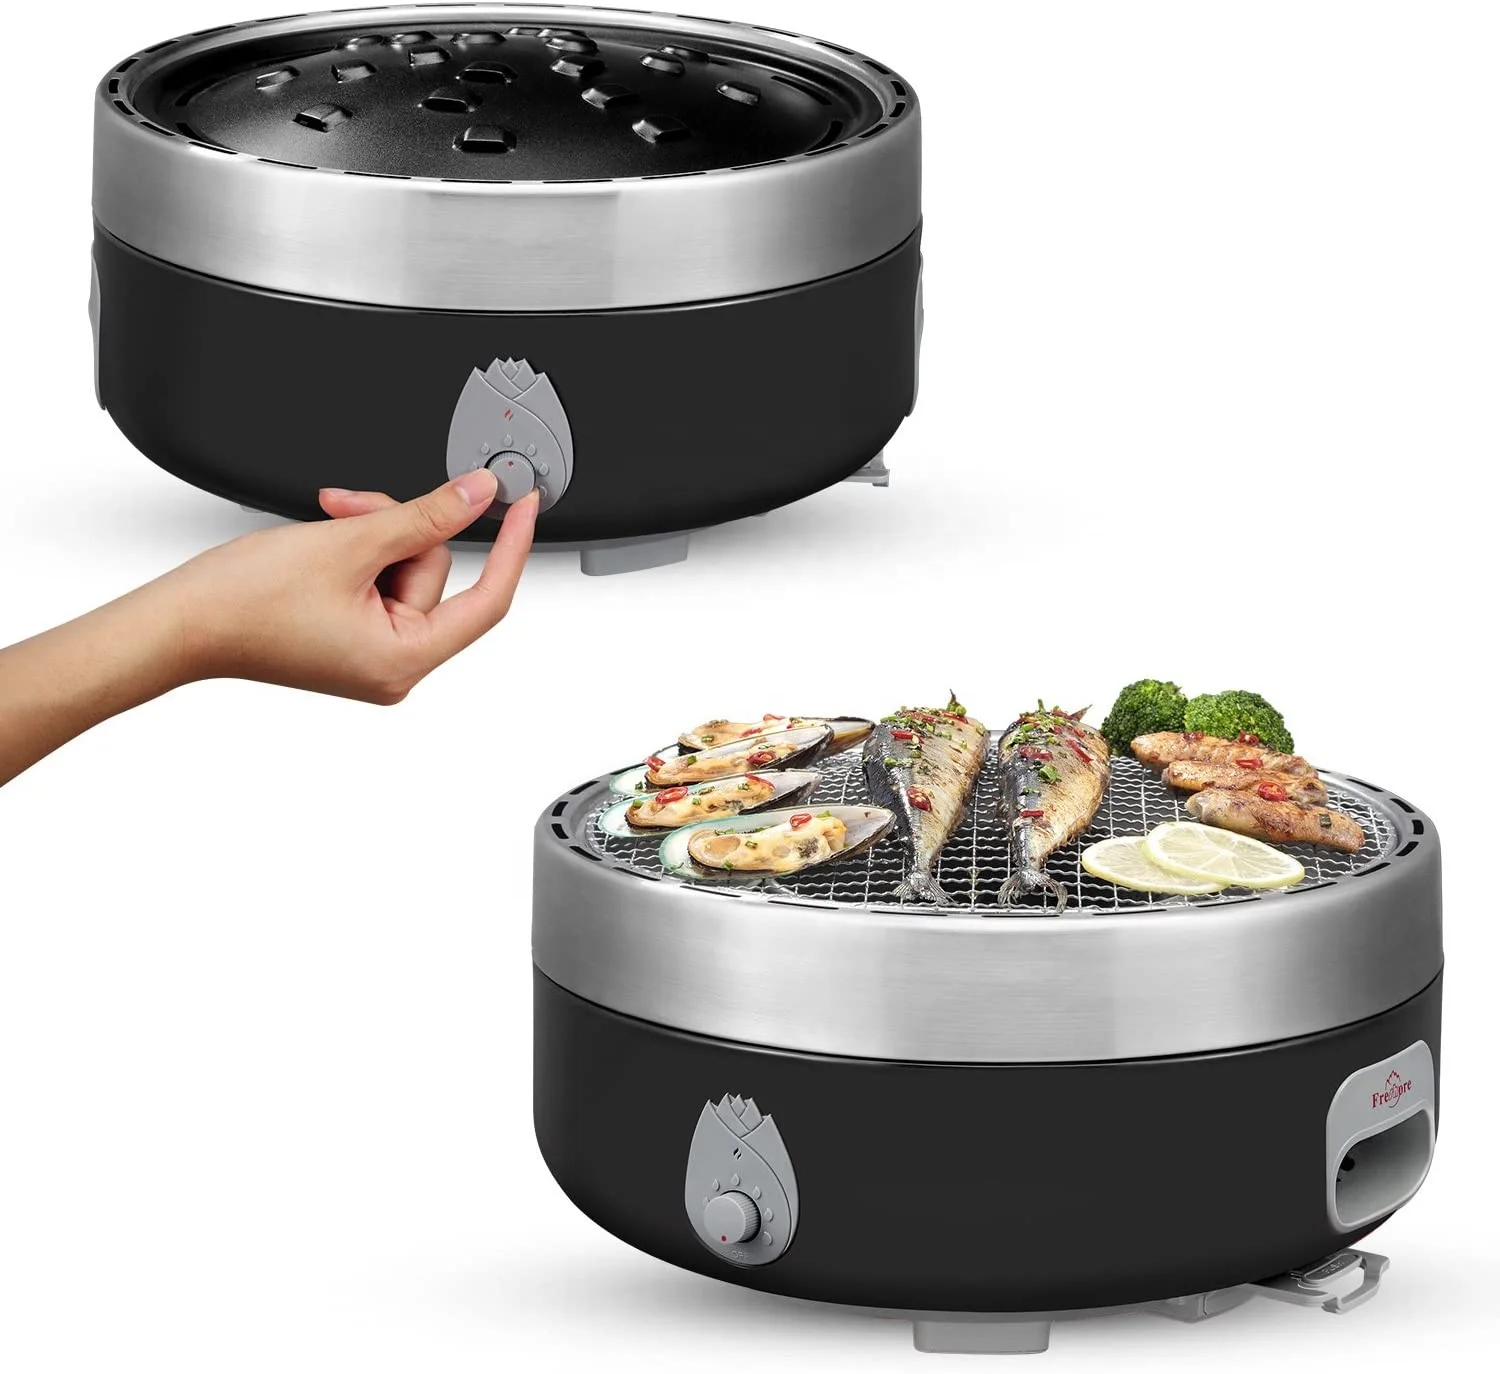 

Barbecue Outdoor Stainless Steel Smokeless Charcoal Grill Tabletop Korean BBQ Grill Ideal for Camping and Travelling